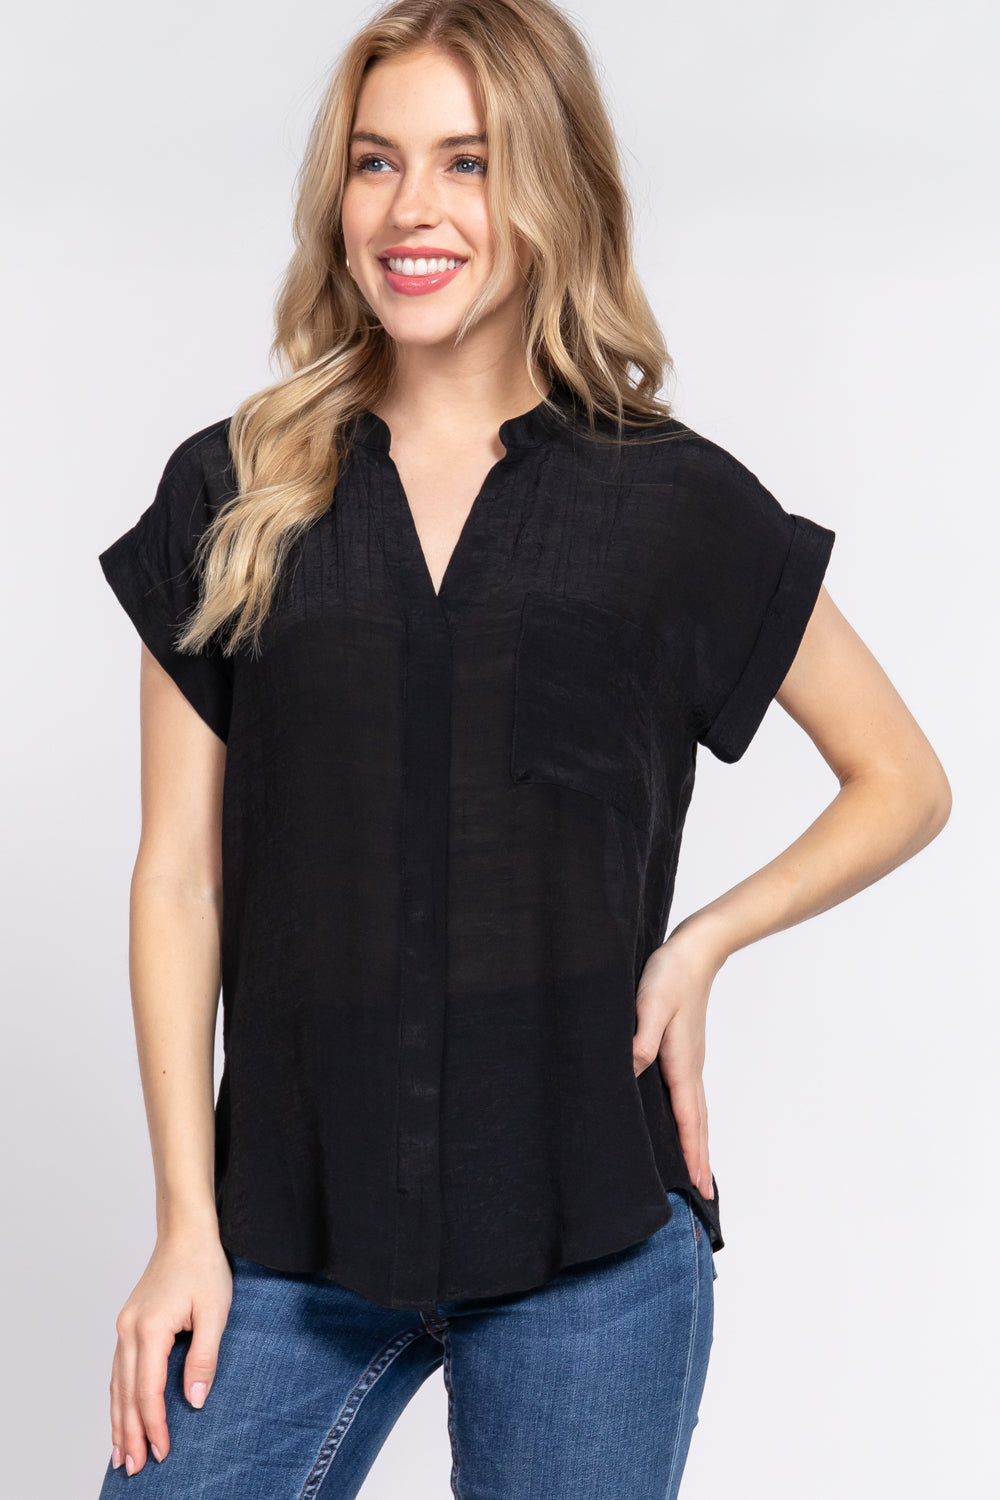 Women's black dolman sleeve woven top with open neck, front pocket, button down front and back slit.